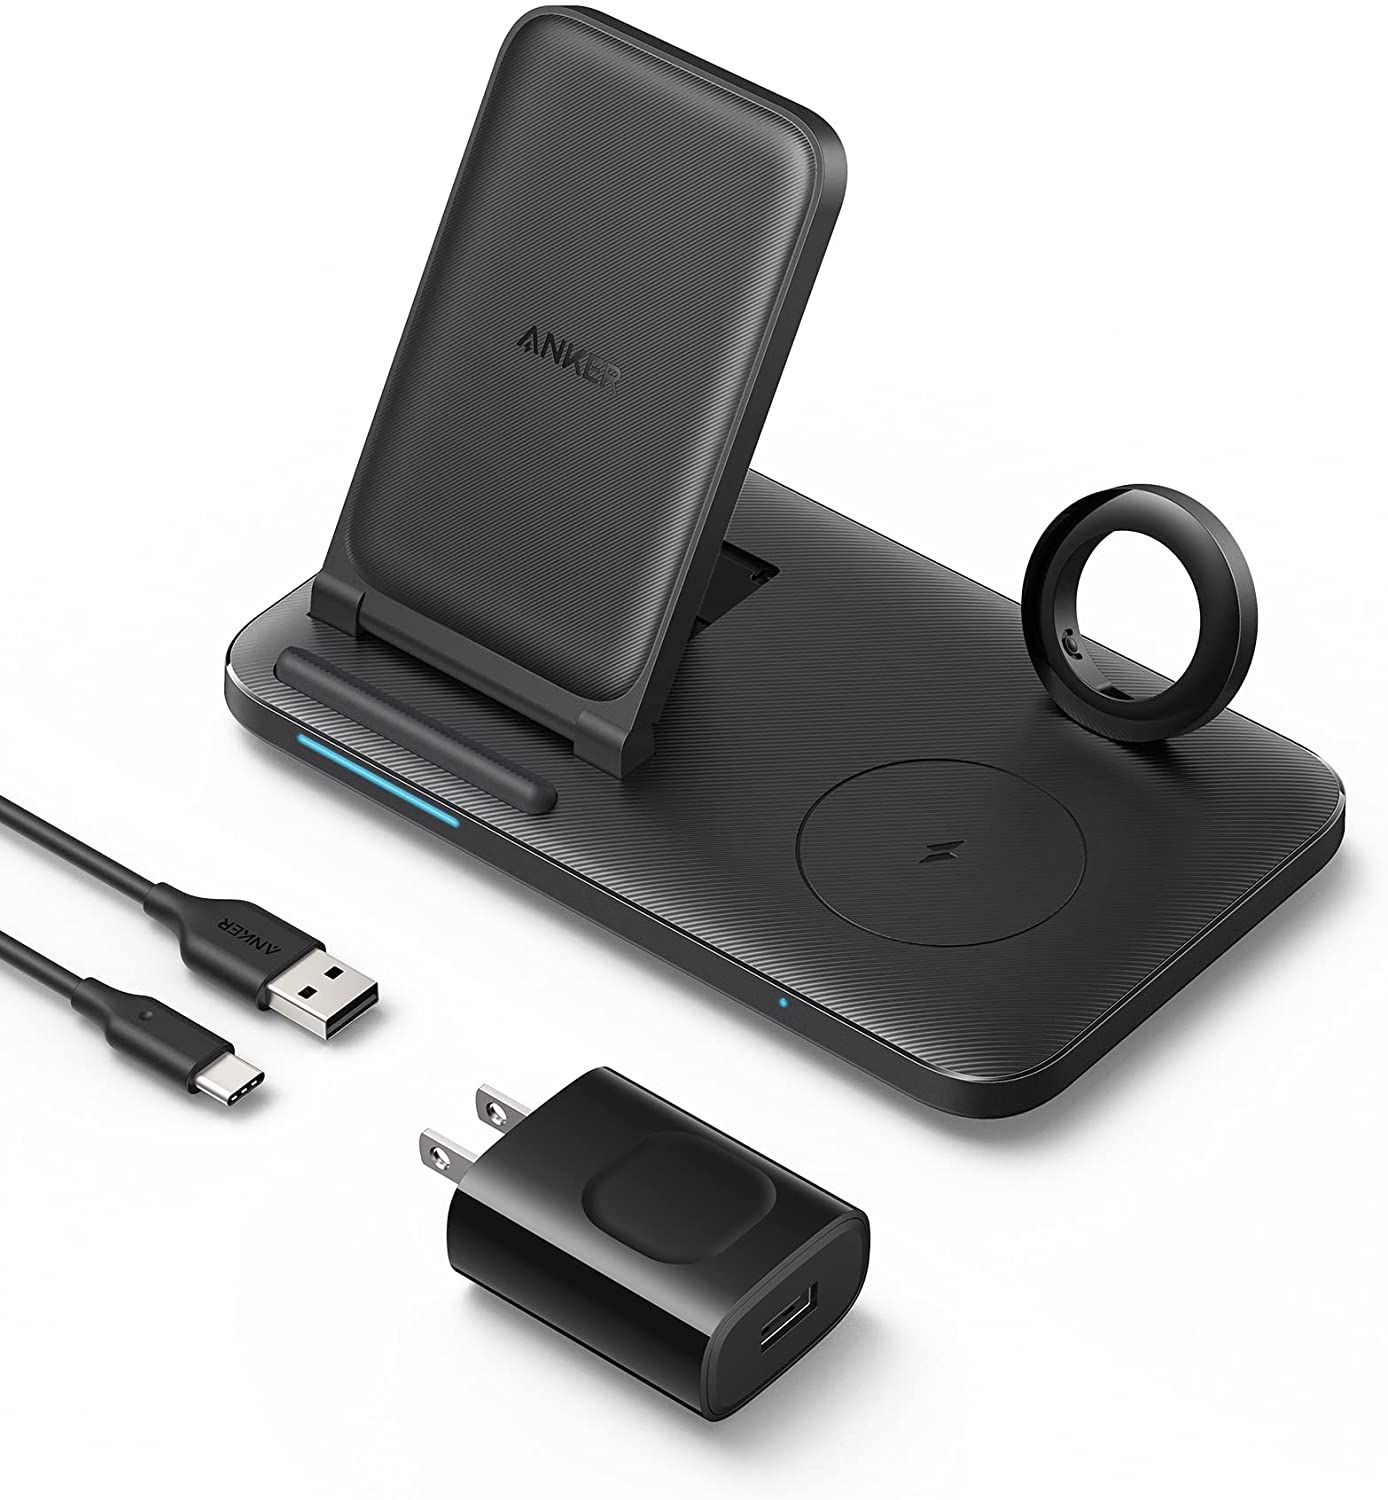 Anker 335 Wireless Charger (3-in-1 Station), The Compact and Convenient Charging Station +FS $25.99